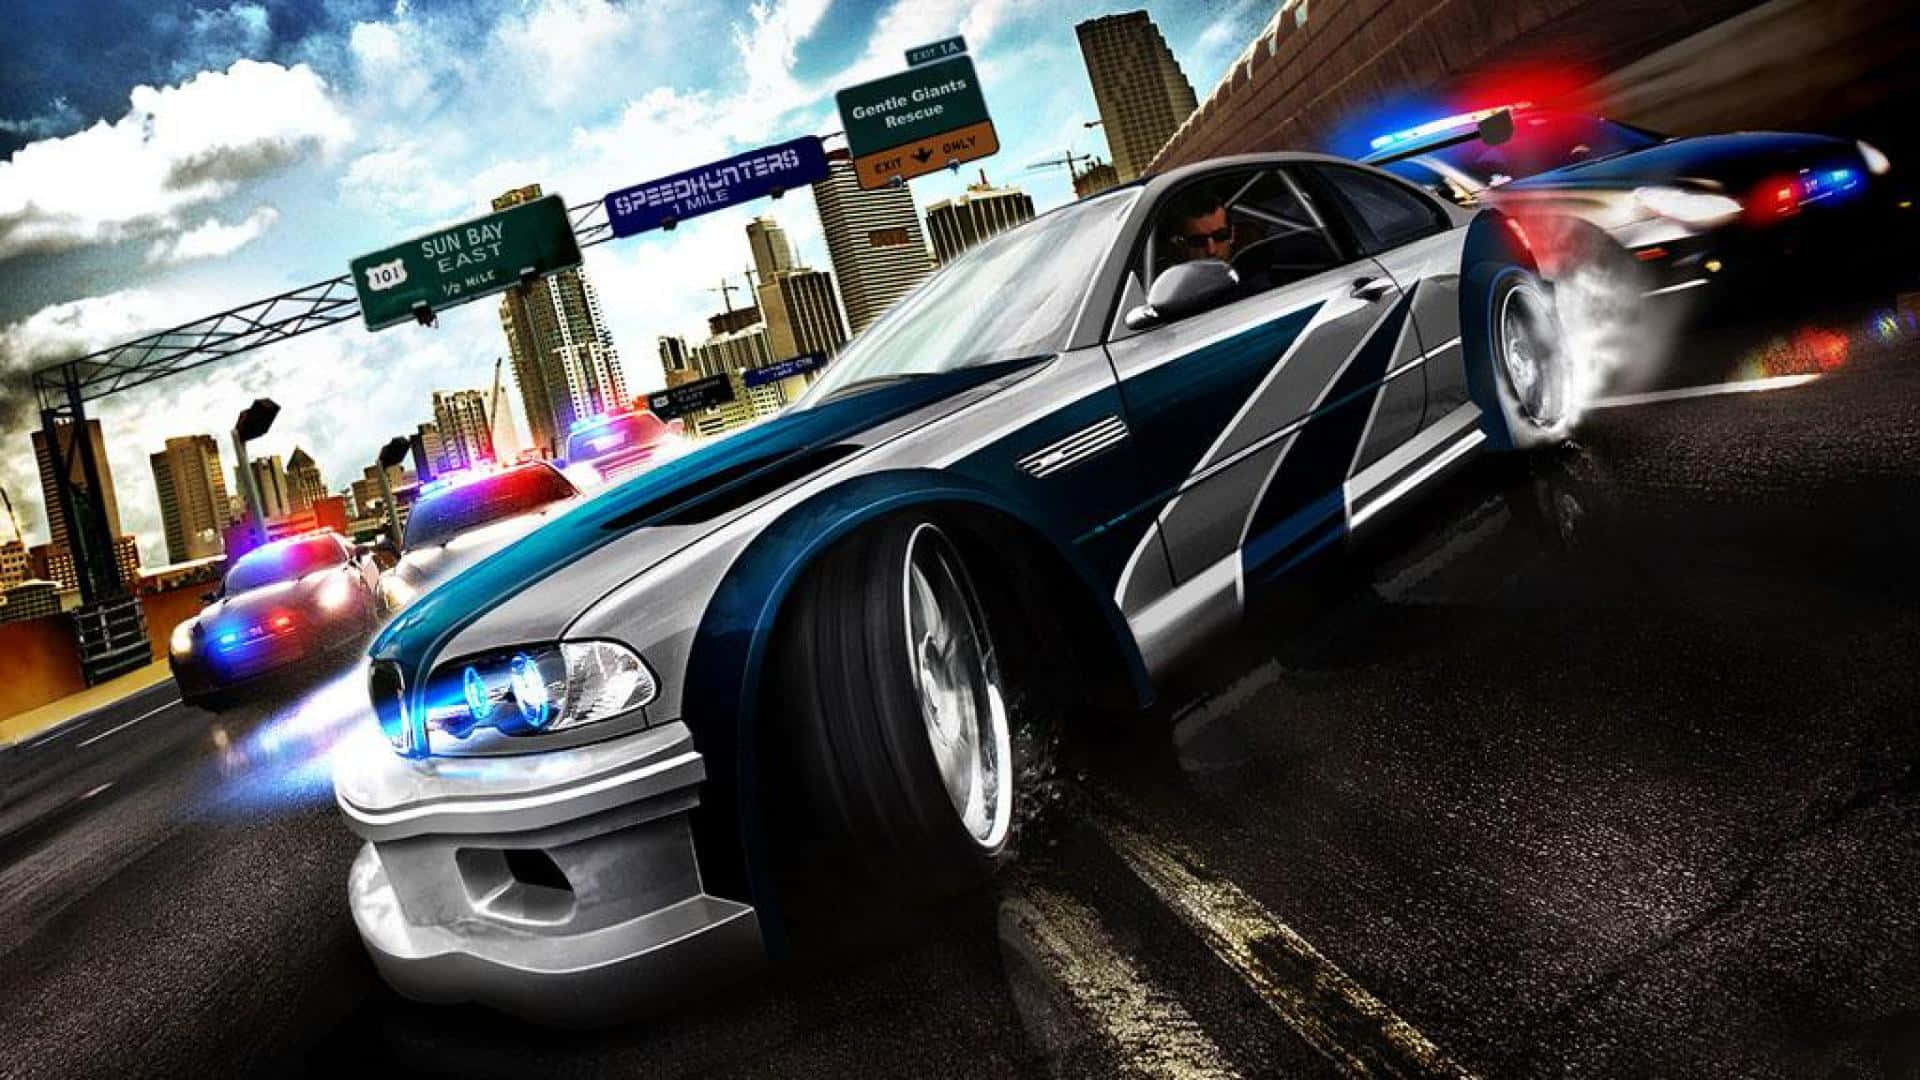 2005 Video Game Most Wanted Need For Speed PC Poster Wallpaper